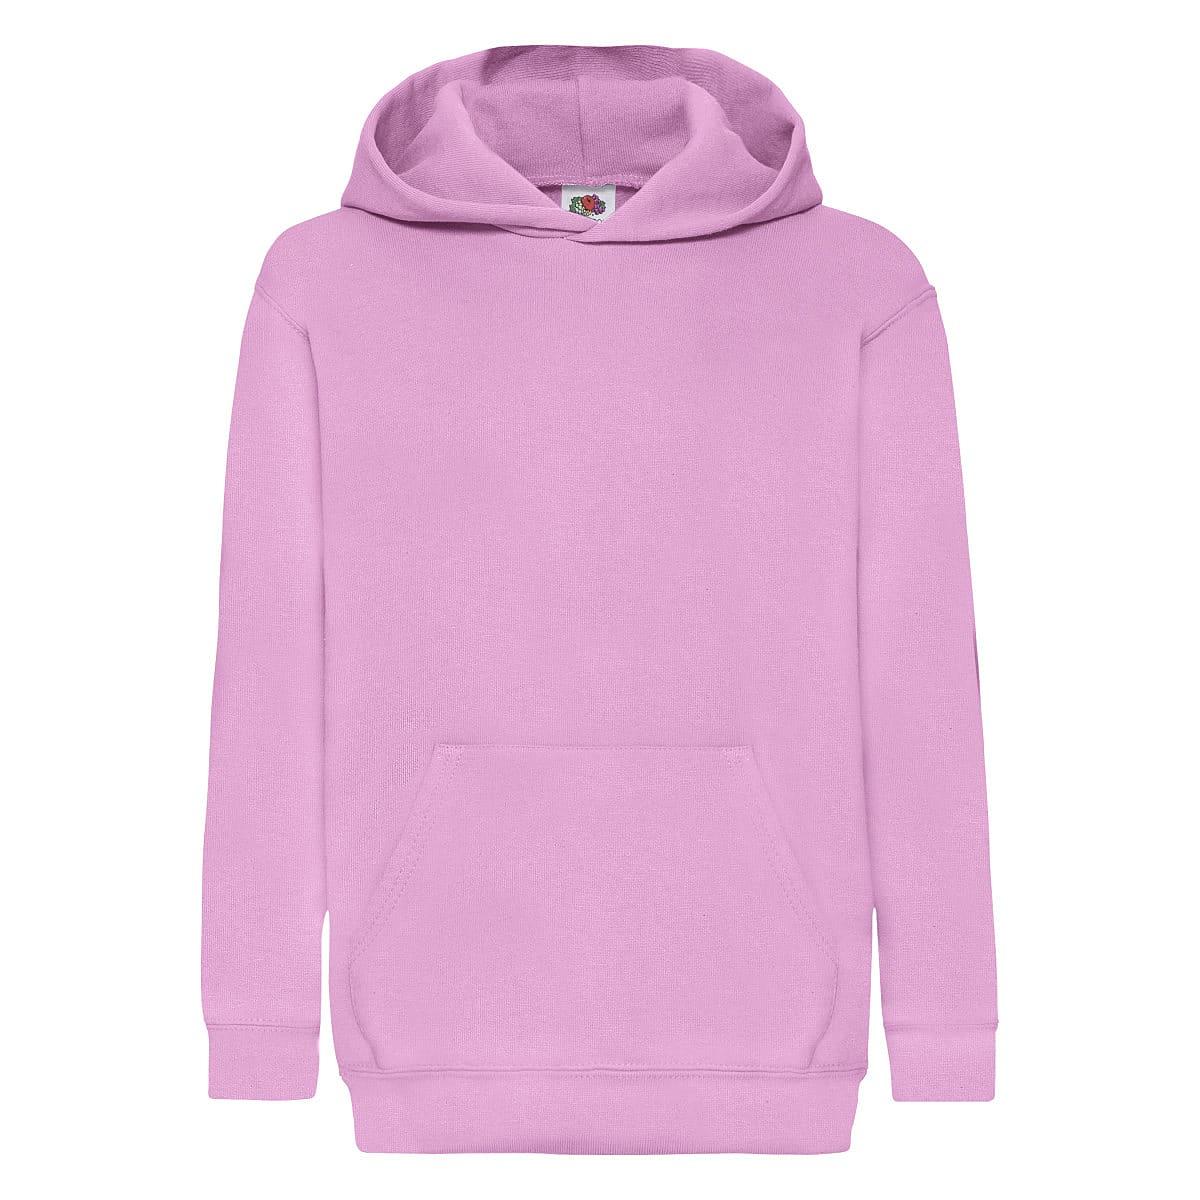 Fruit Of The Loom Childrens Hoodie in Light Pink (Product Code: 62043)